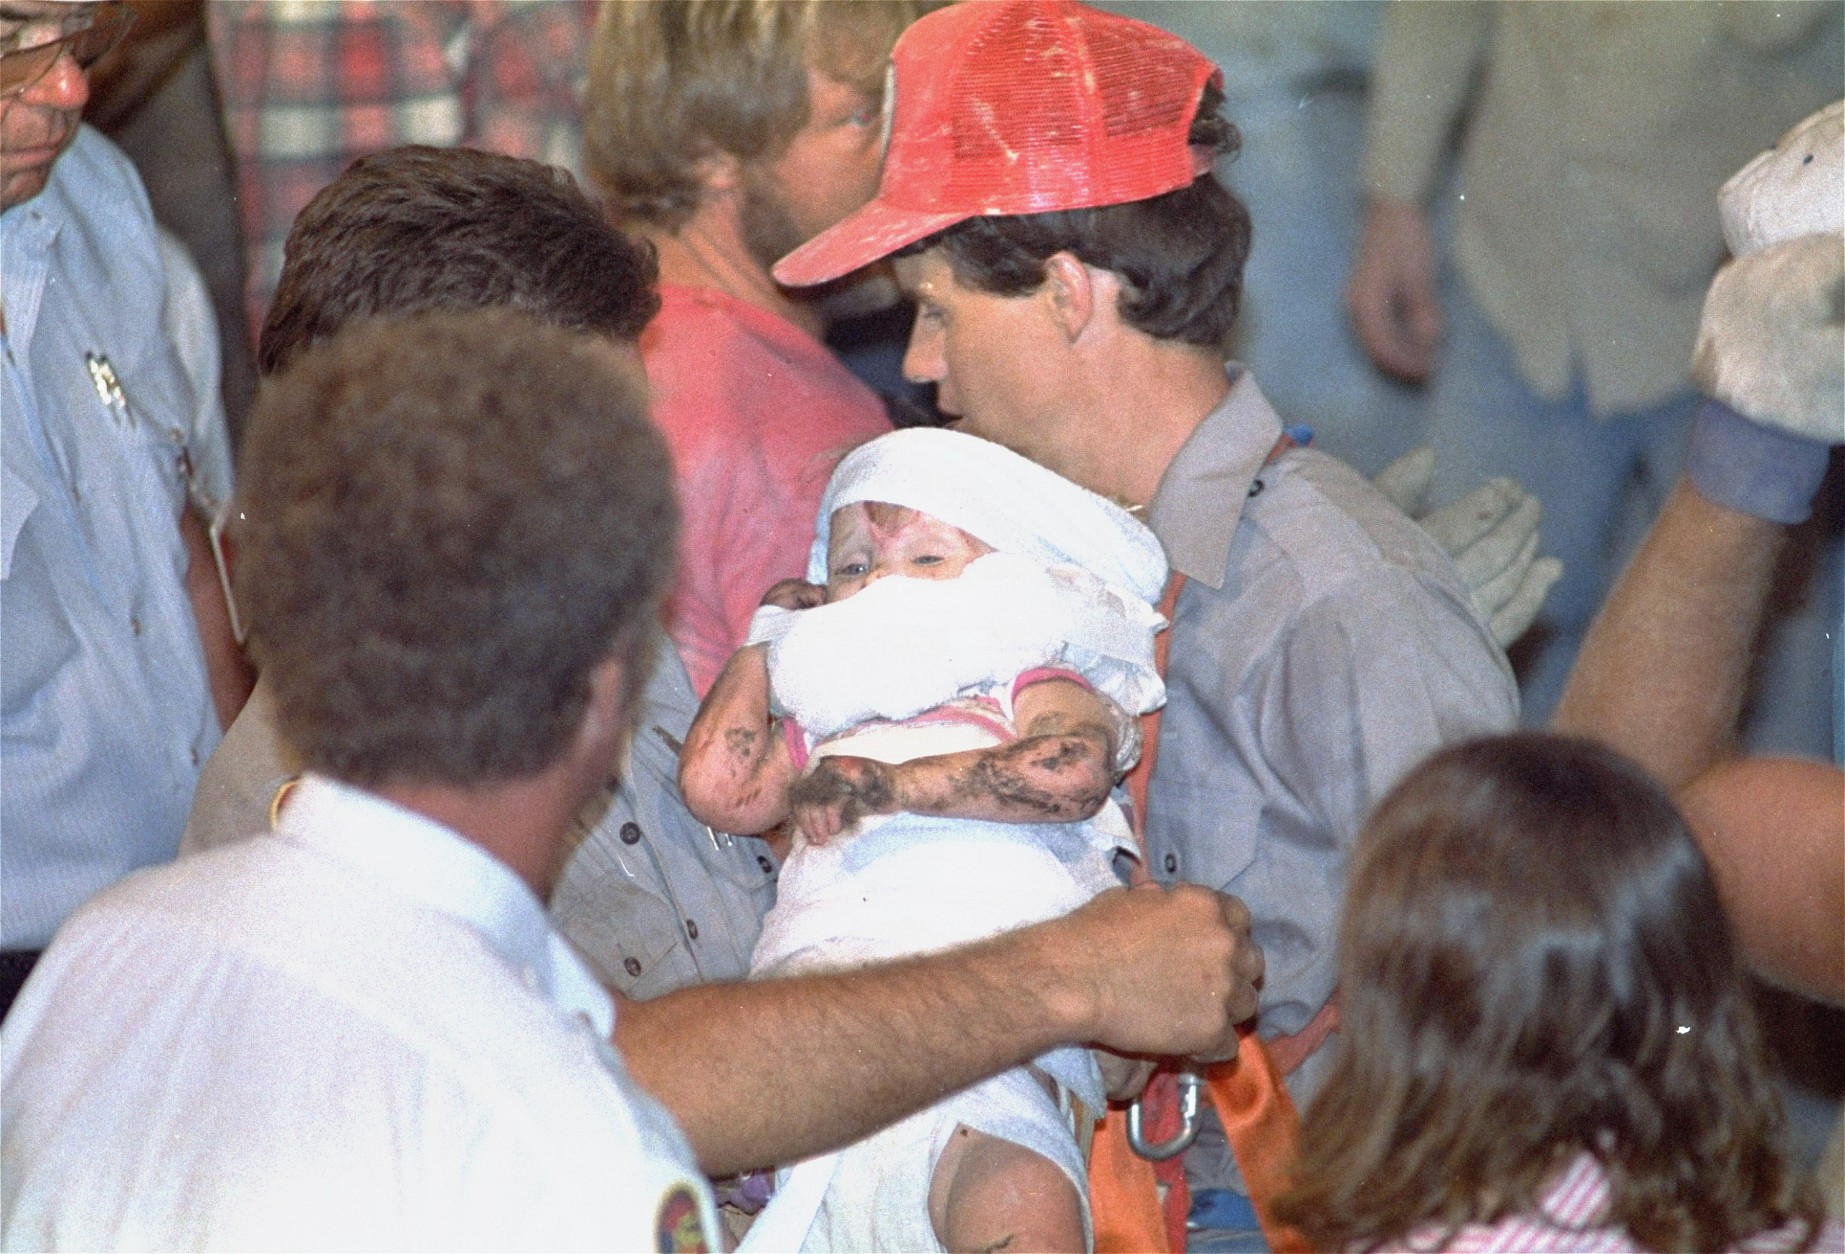 Eighteen-month old Jessica McClure is held by rescue worker Steven Forbes Friday night, Oct. 16, 1987 after she was trapped 22 feet under ground in an abandoned water well since Wednesday morning.  (AP Photo/Eric Gay)